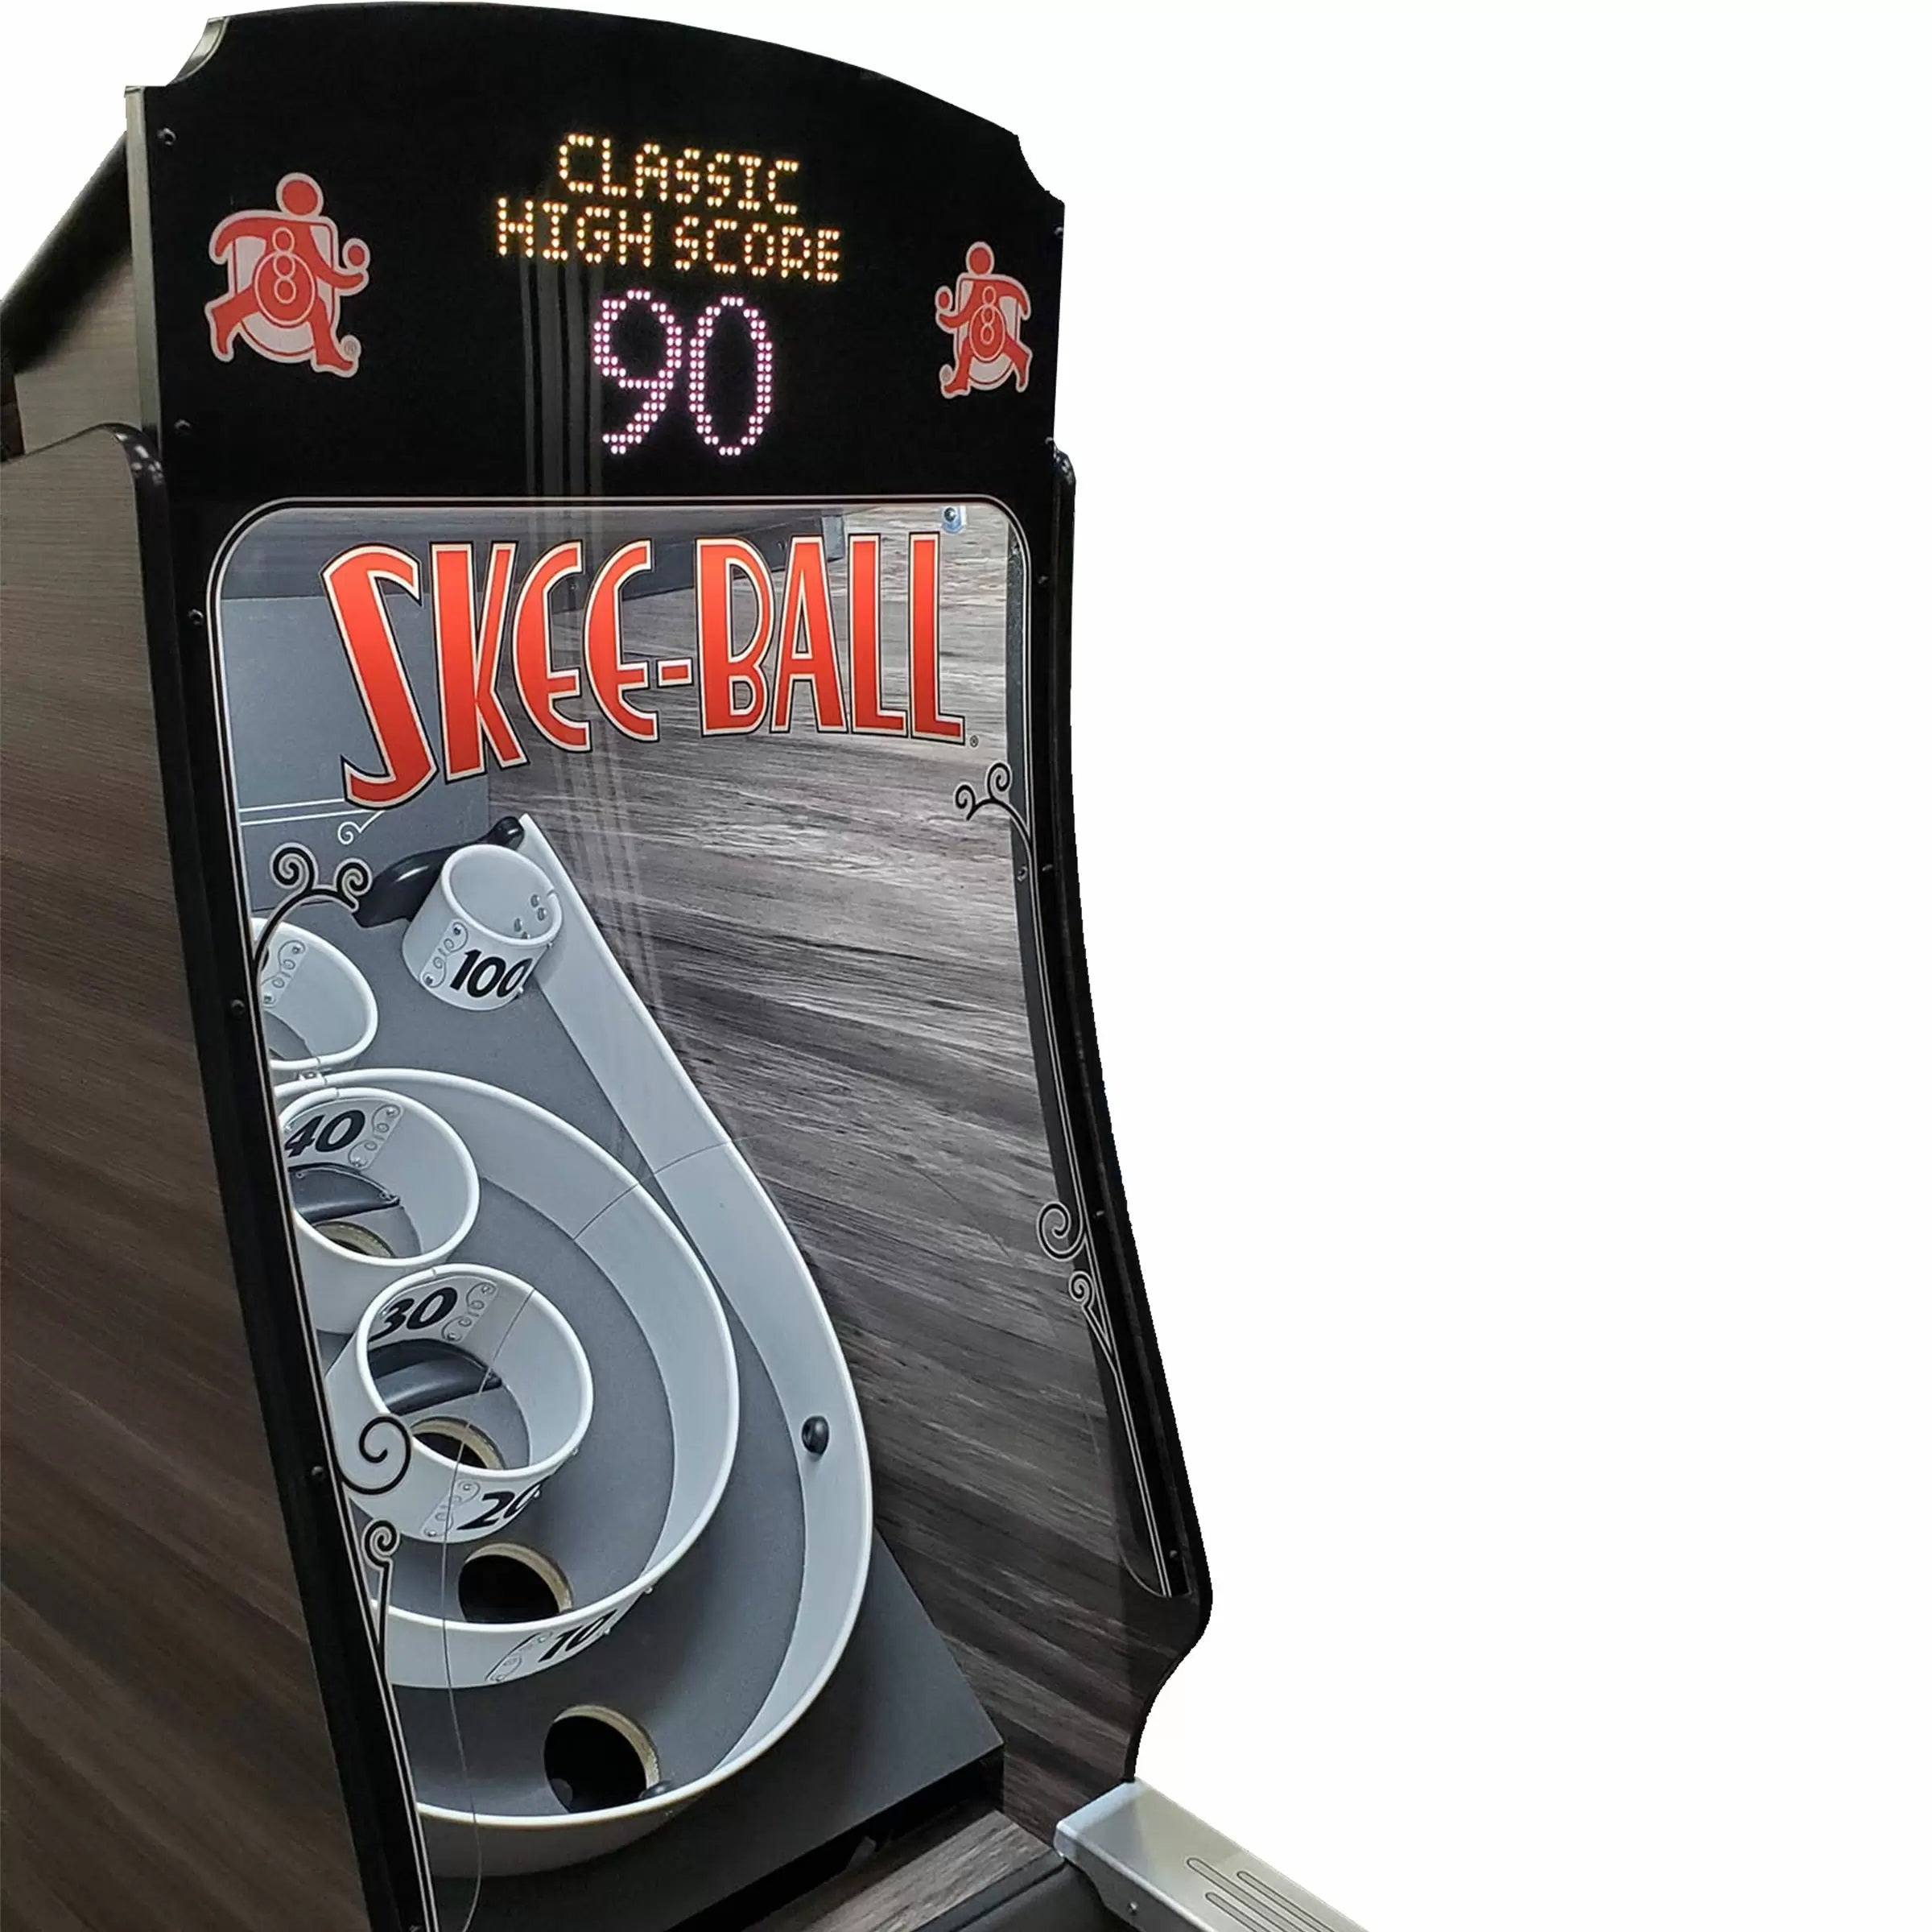 Imperial USA Home Arcade Premium Skee Ball with Coal Cork Front Board